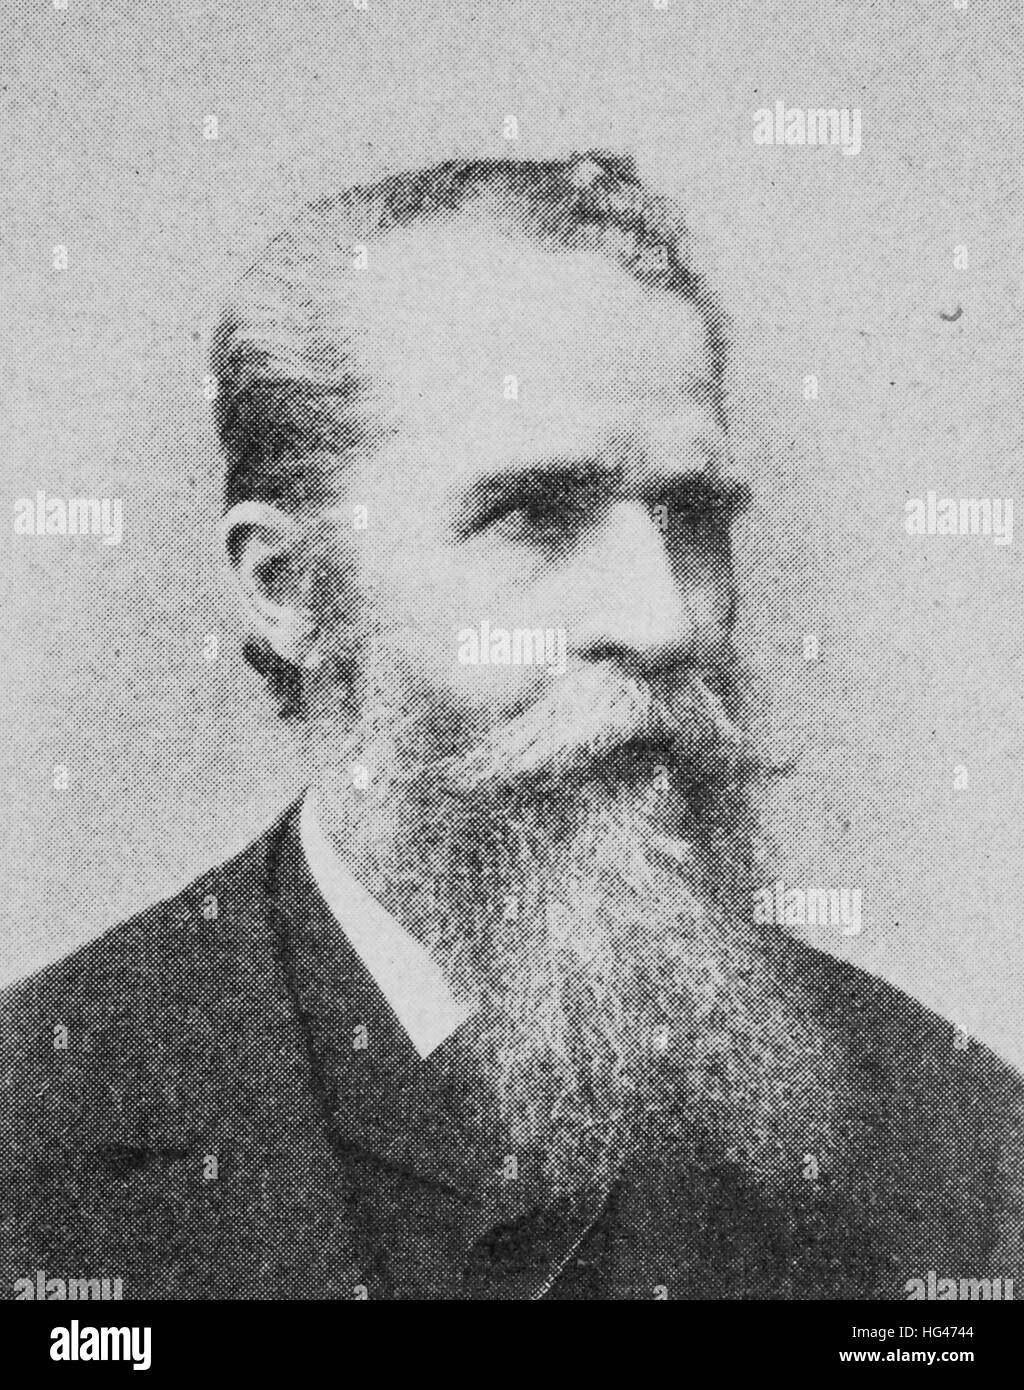 Matthaeus Much, Born 18 October 1832; Died 17 December 1909, was an Austrian prehistorian and monument preserve, reproduction of a photo from the year 1895, digital improved Stock Photo